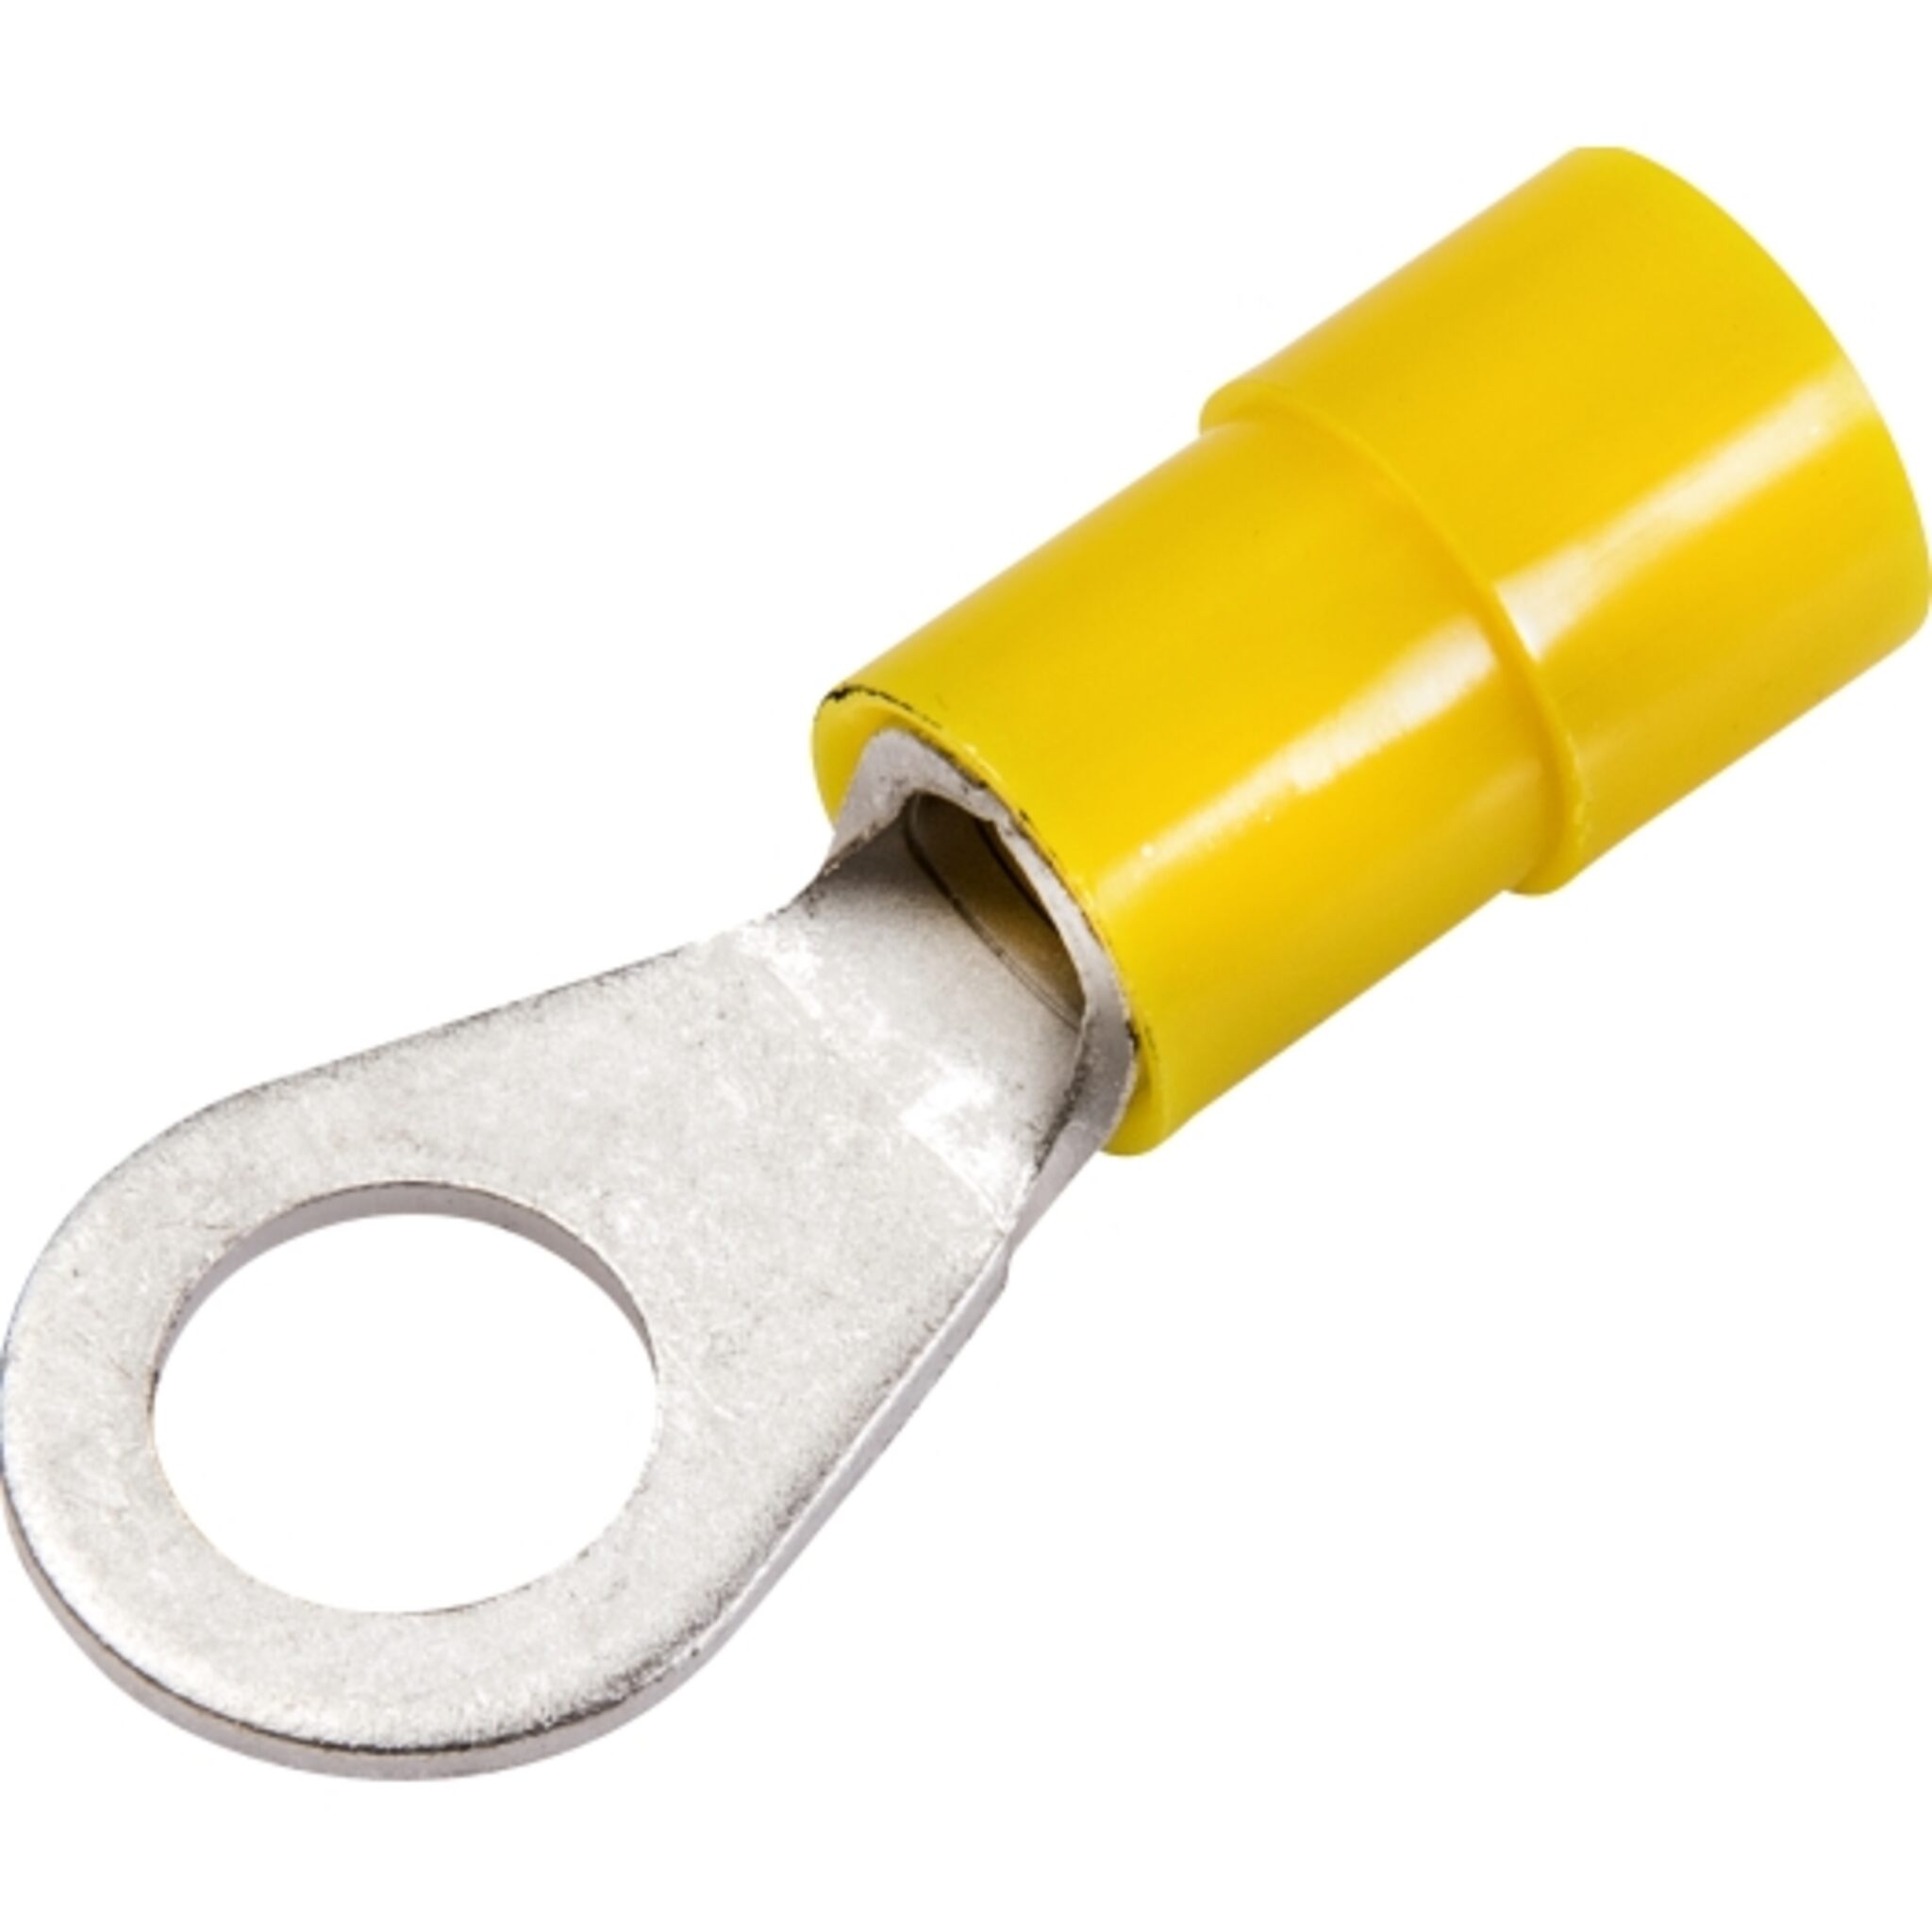 Ring cable lug 4.0 - 6.0 mm, yellow